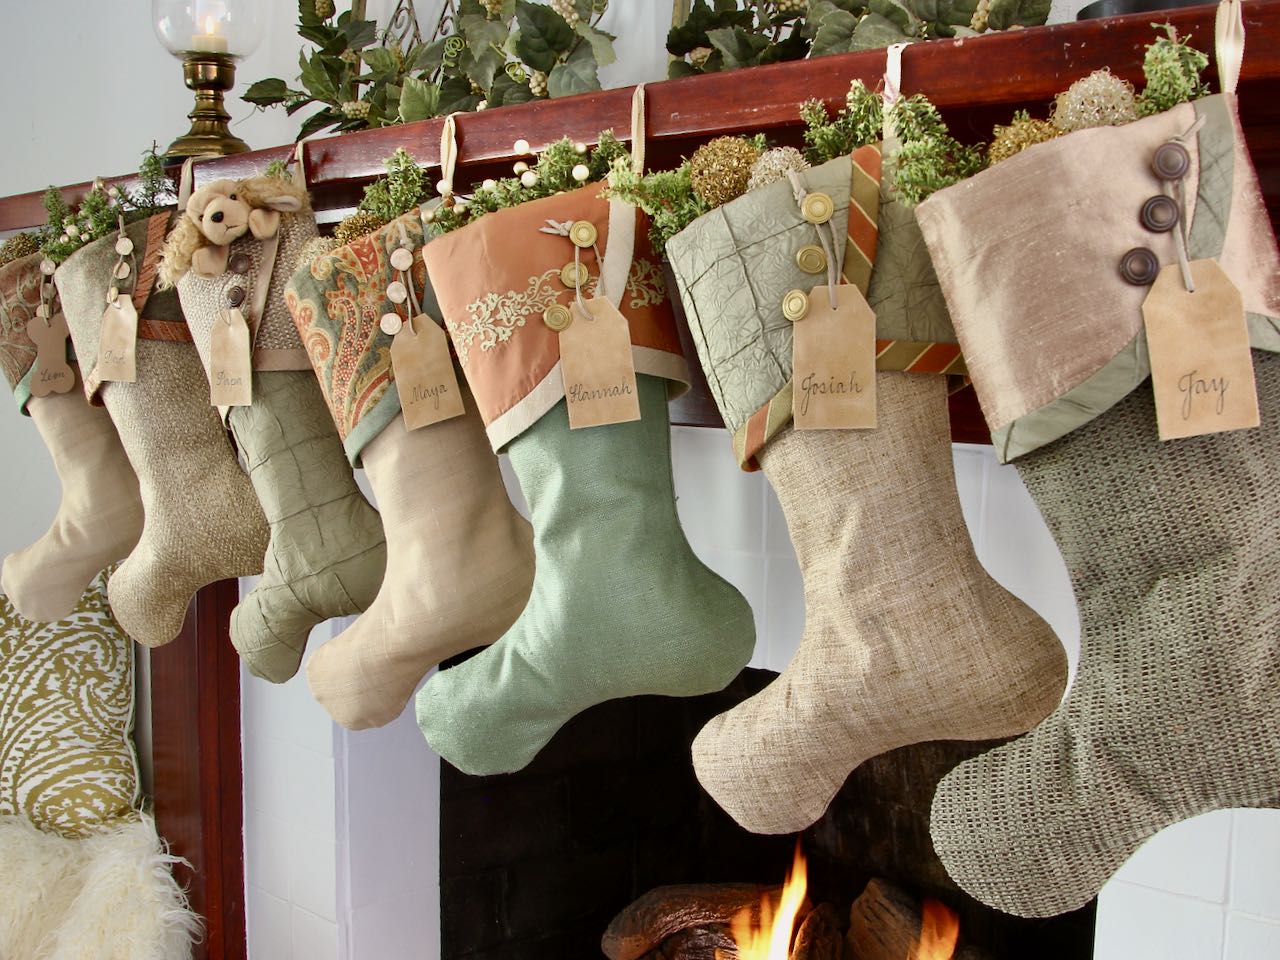 7 coordinating yet unique Luxury Christmas stockings are hagning from a mantel above a fire. Leather name tags hang from the top of three buttons on each cuff